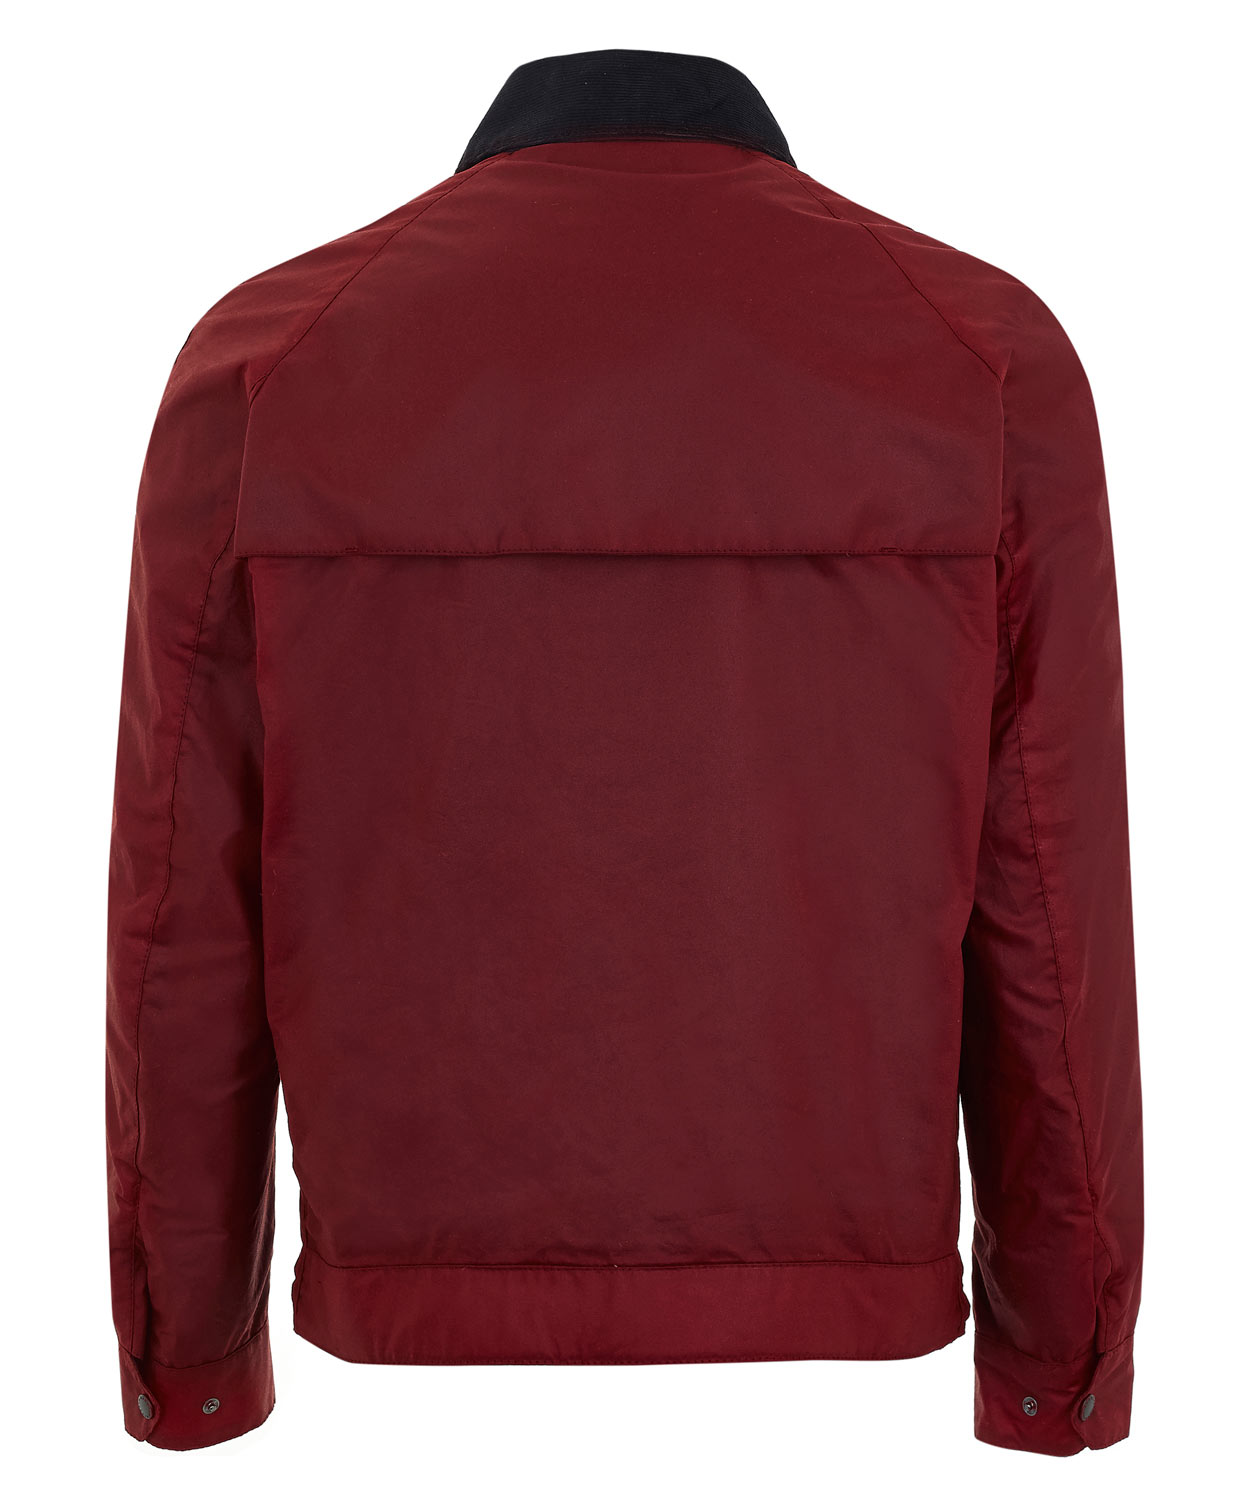 Lyst - Barbour Red Waxed Cotton Bomber Jacket in Red for Men